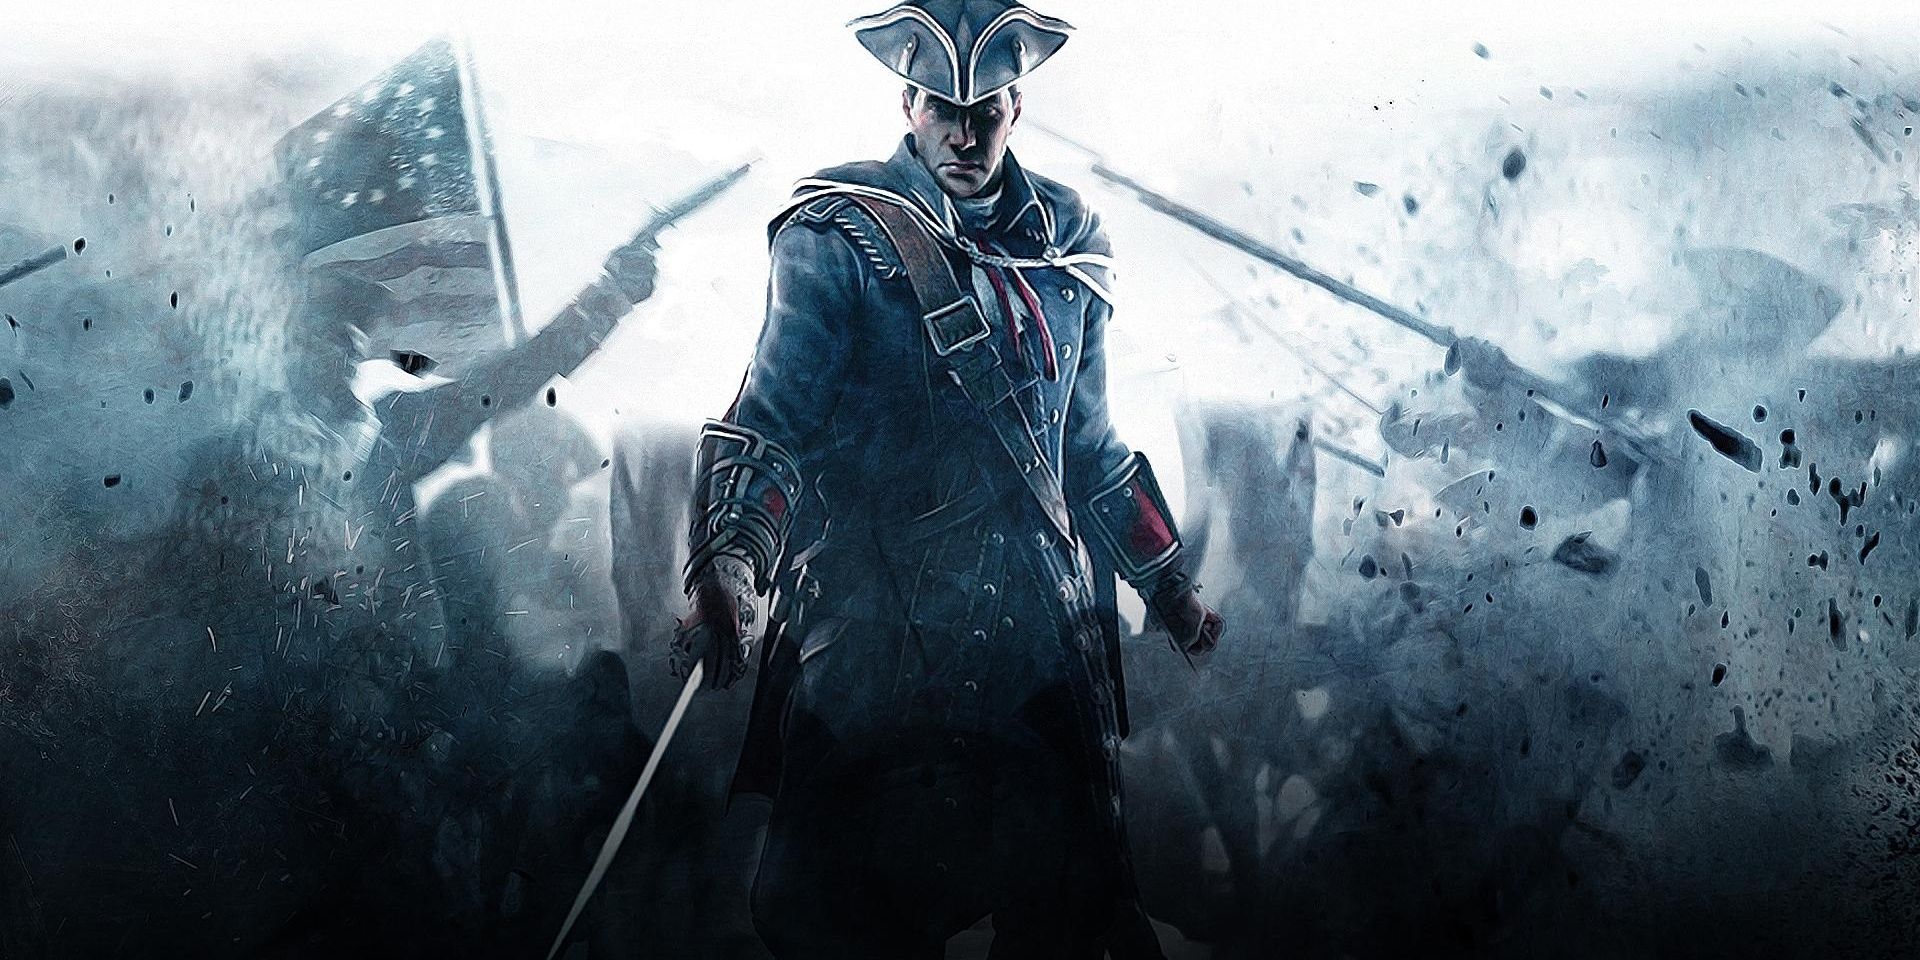 Haytham Kenway stands in a battlefield in Assassins Creed III Cropped